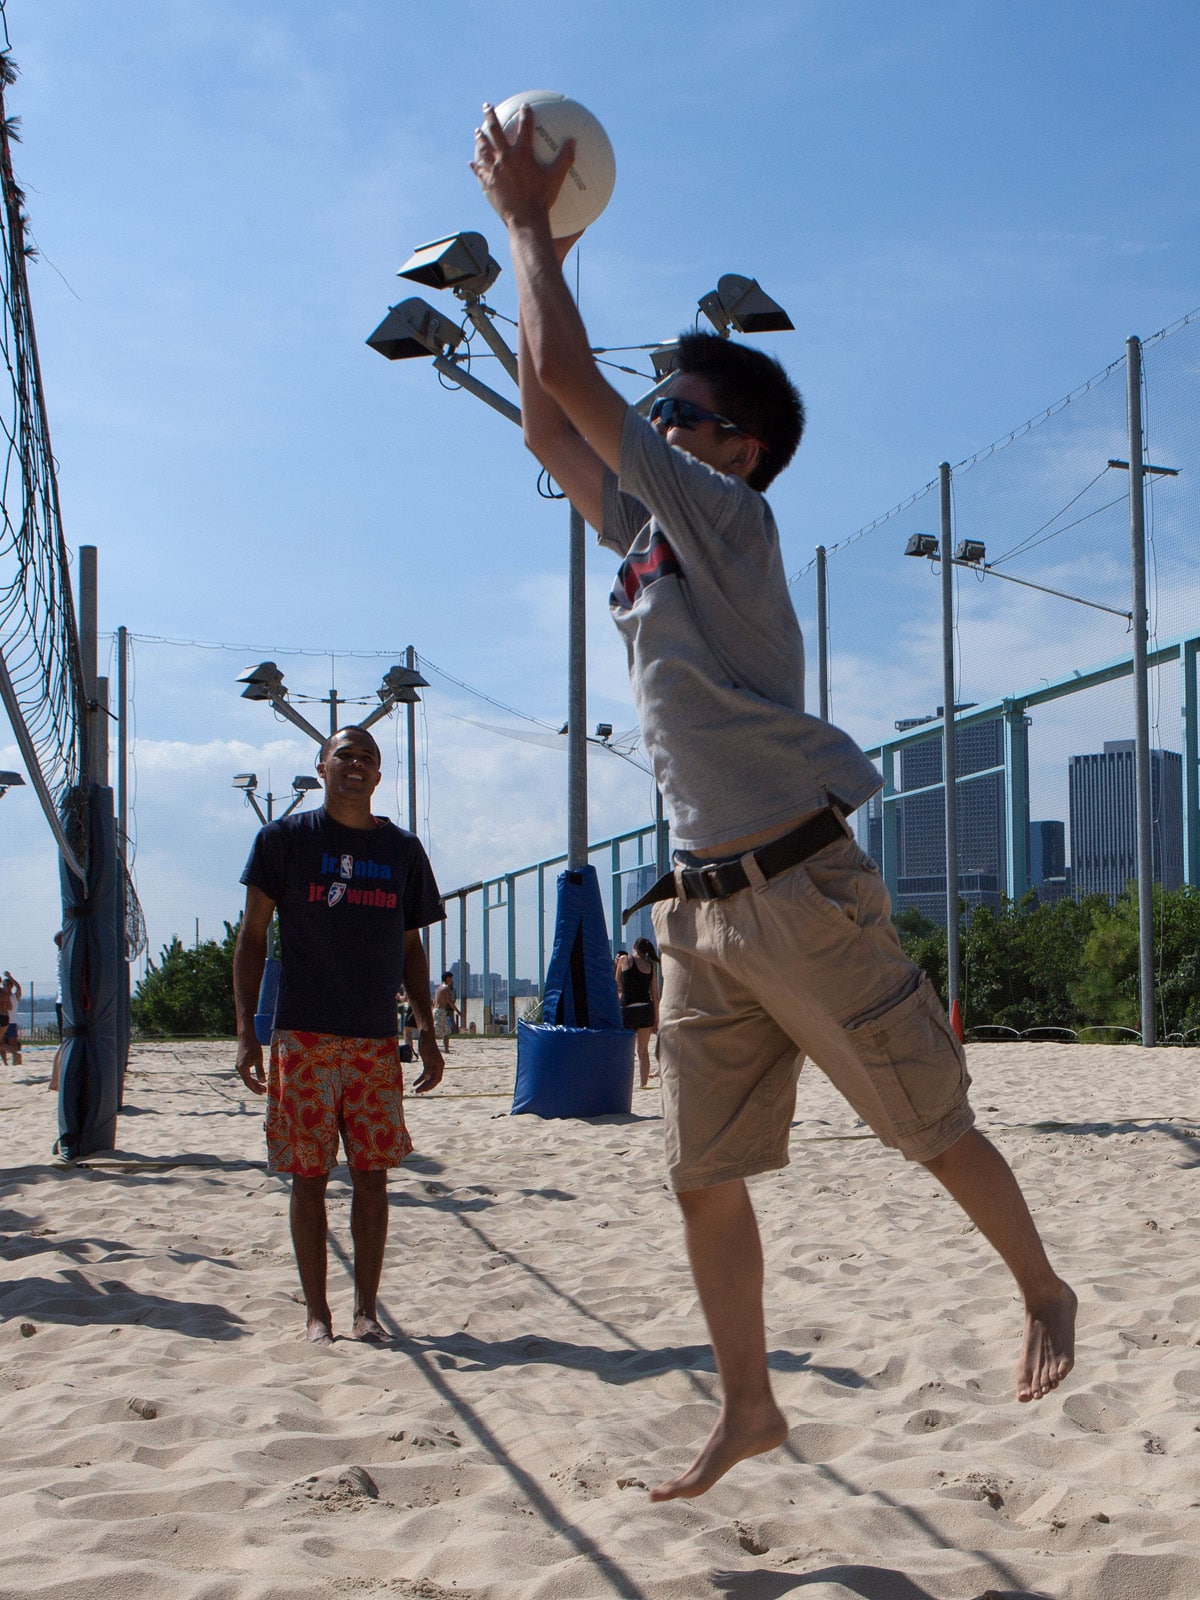 Man catching volleyball on a sand court at Pier 6 on a sunny day.